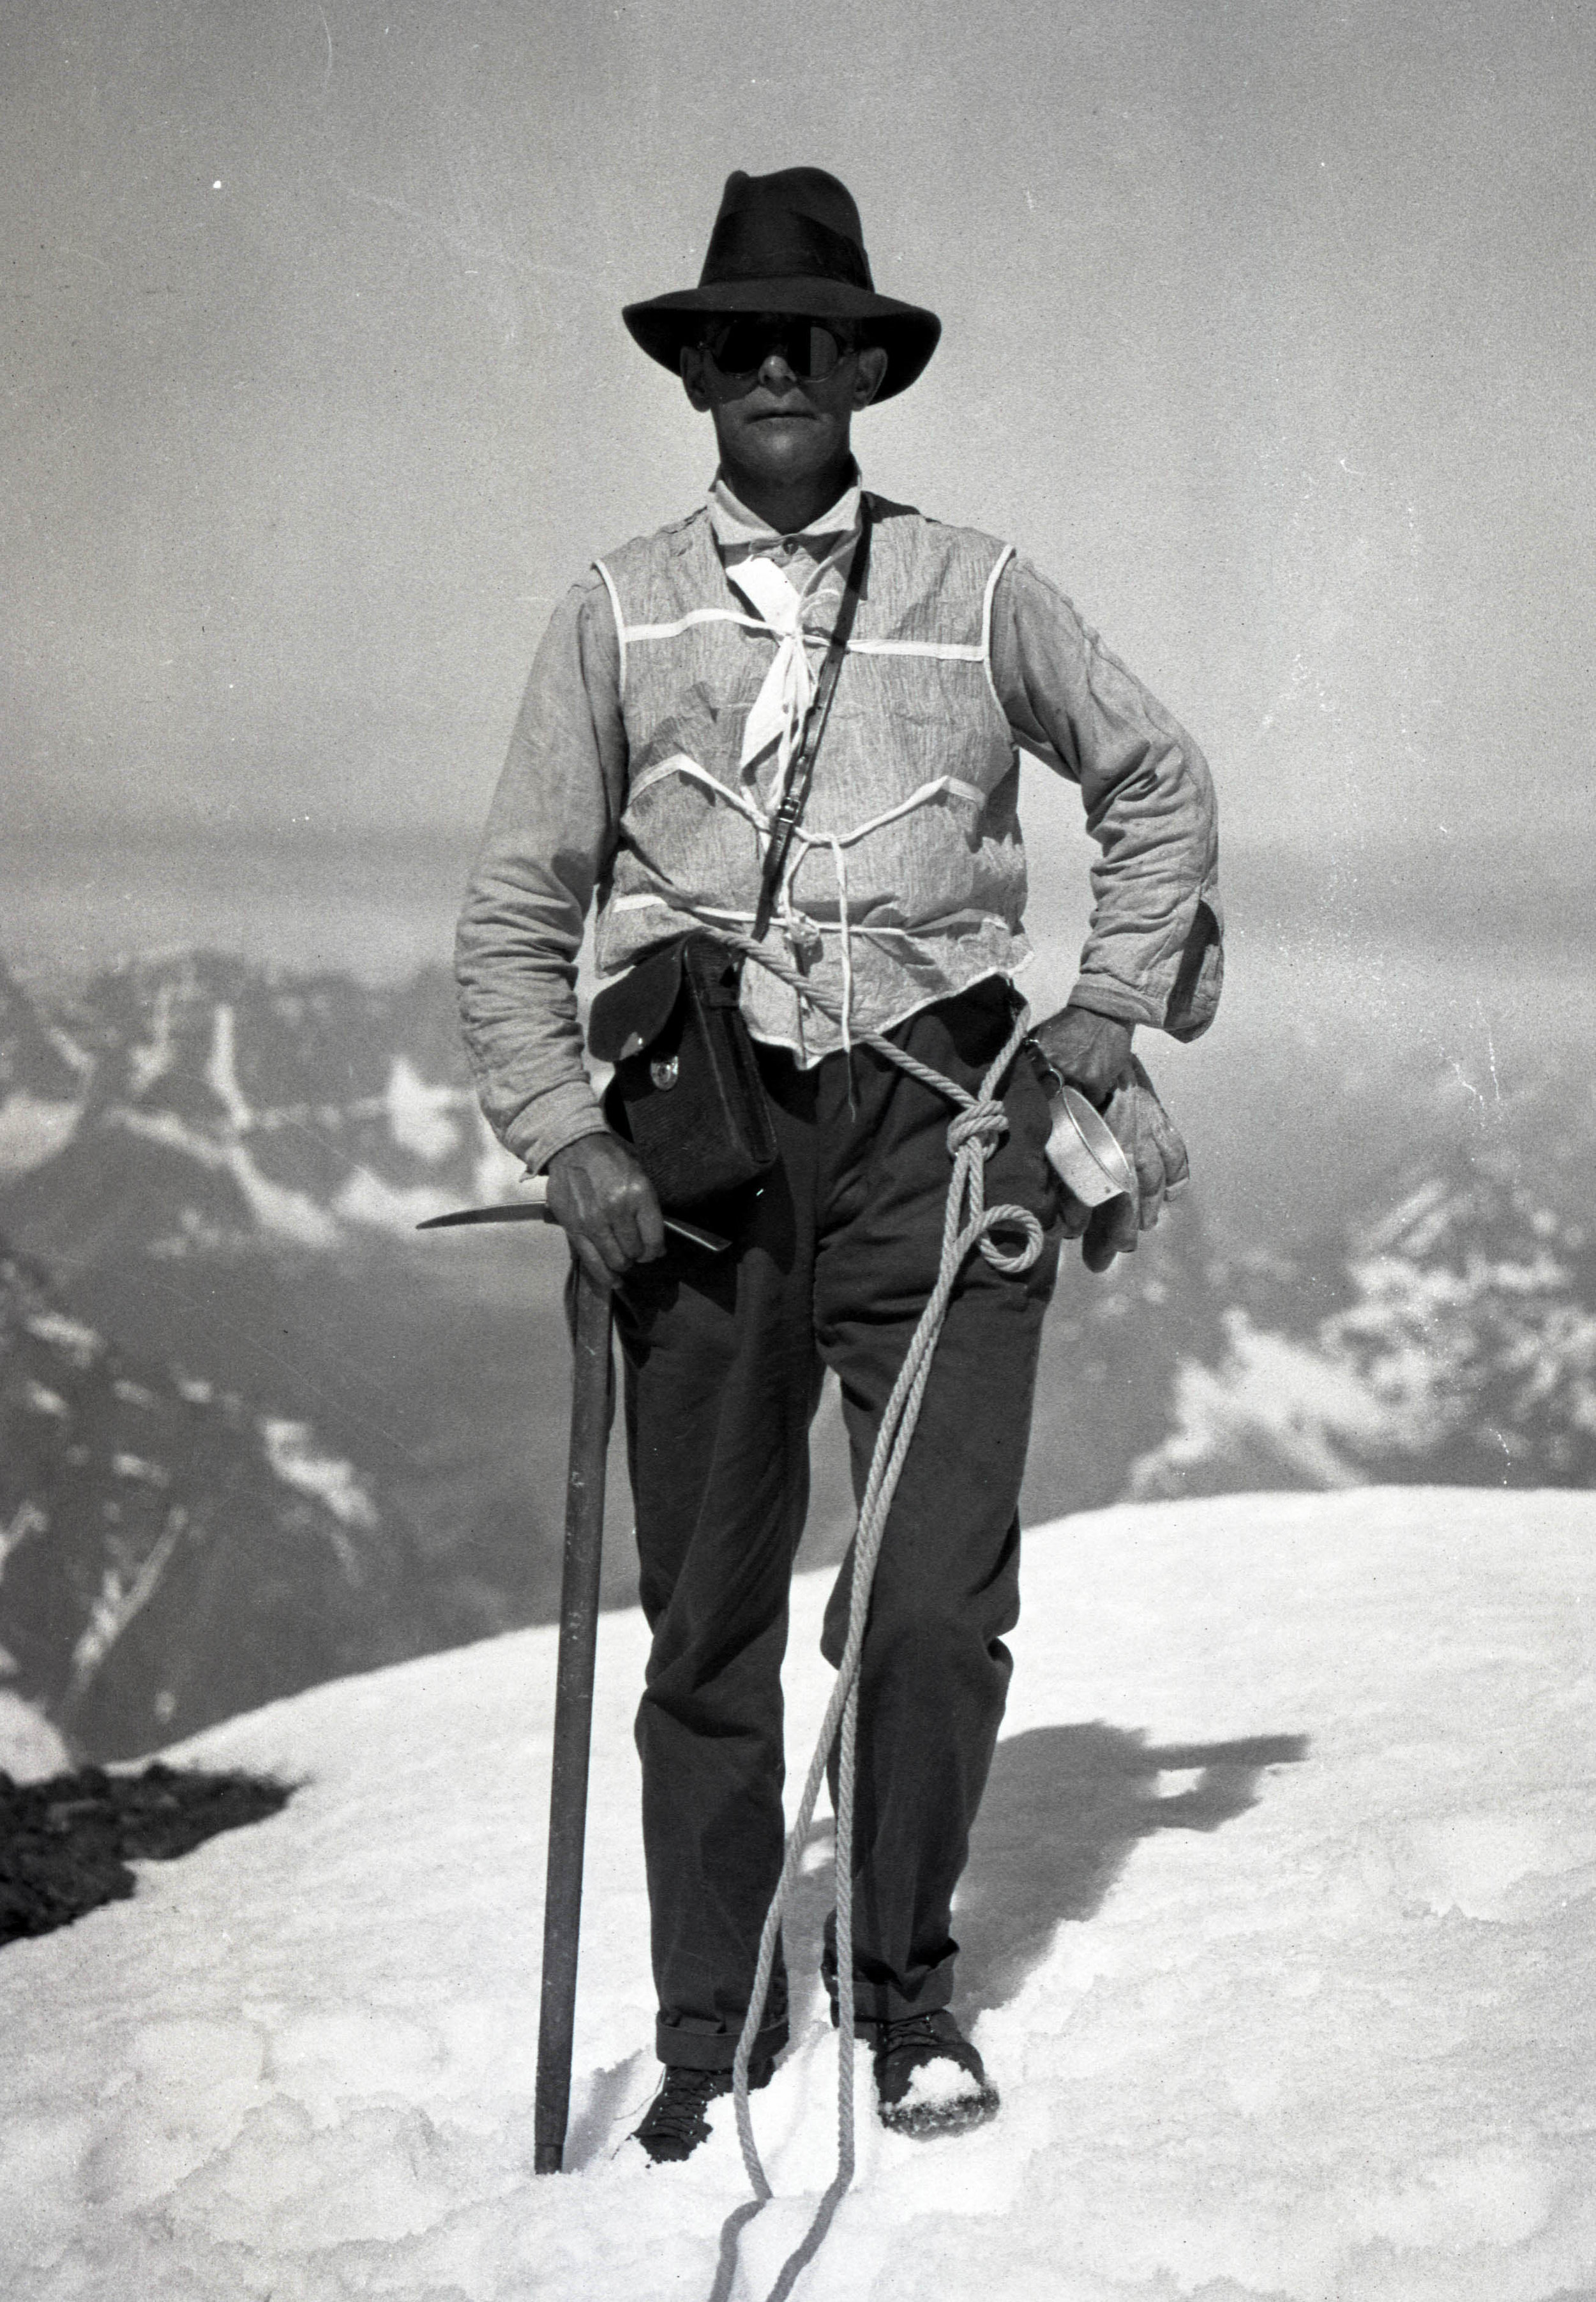  From the collections of the American Alpine Club 